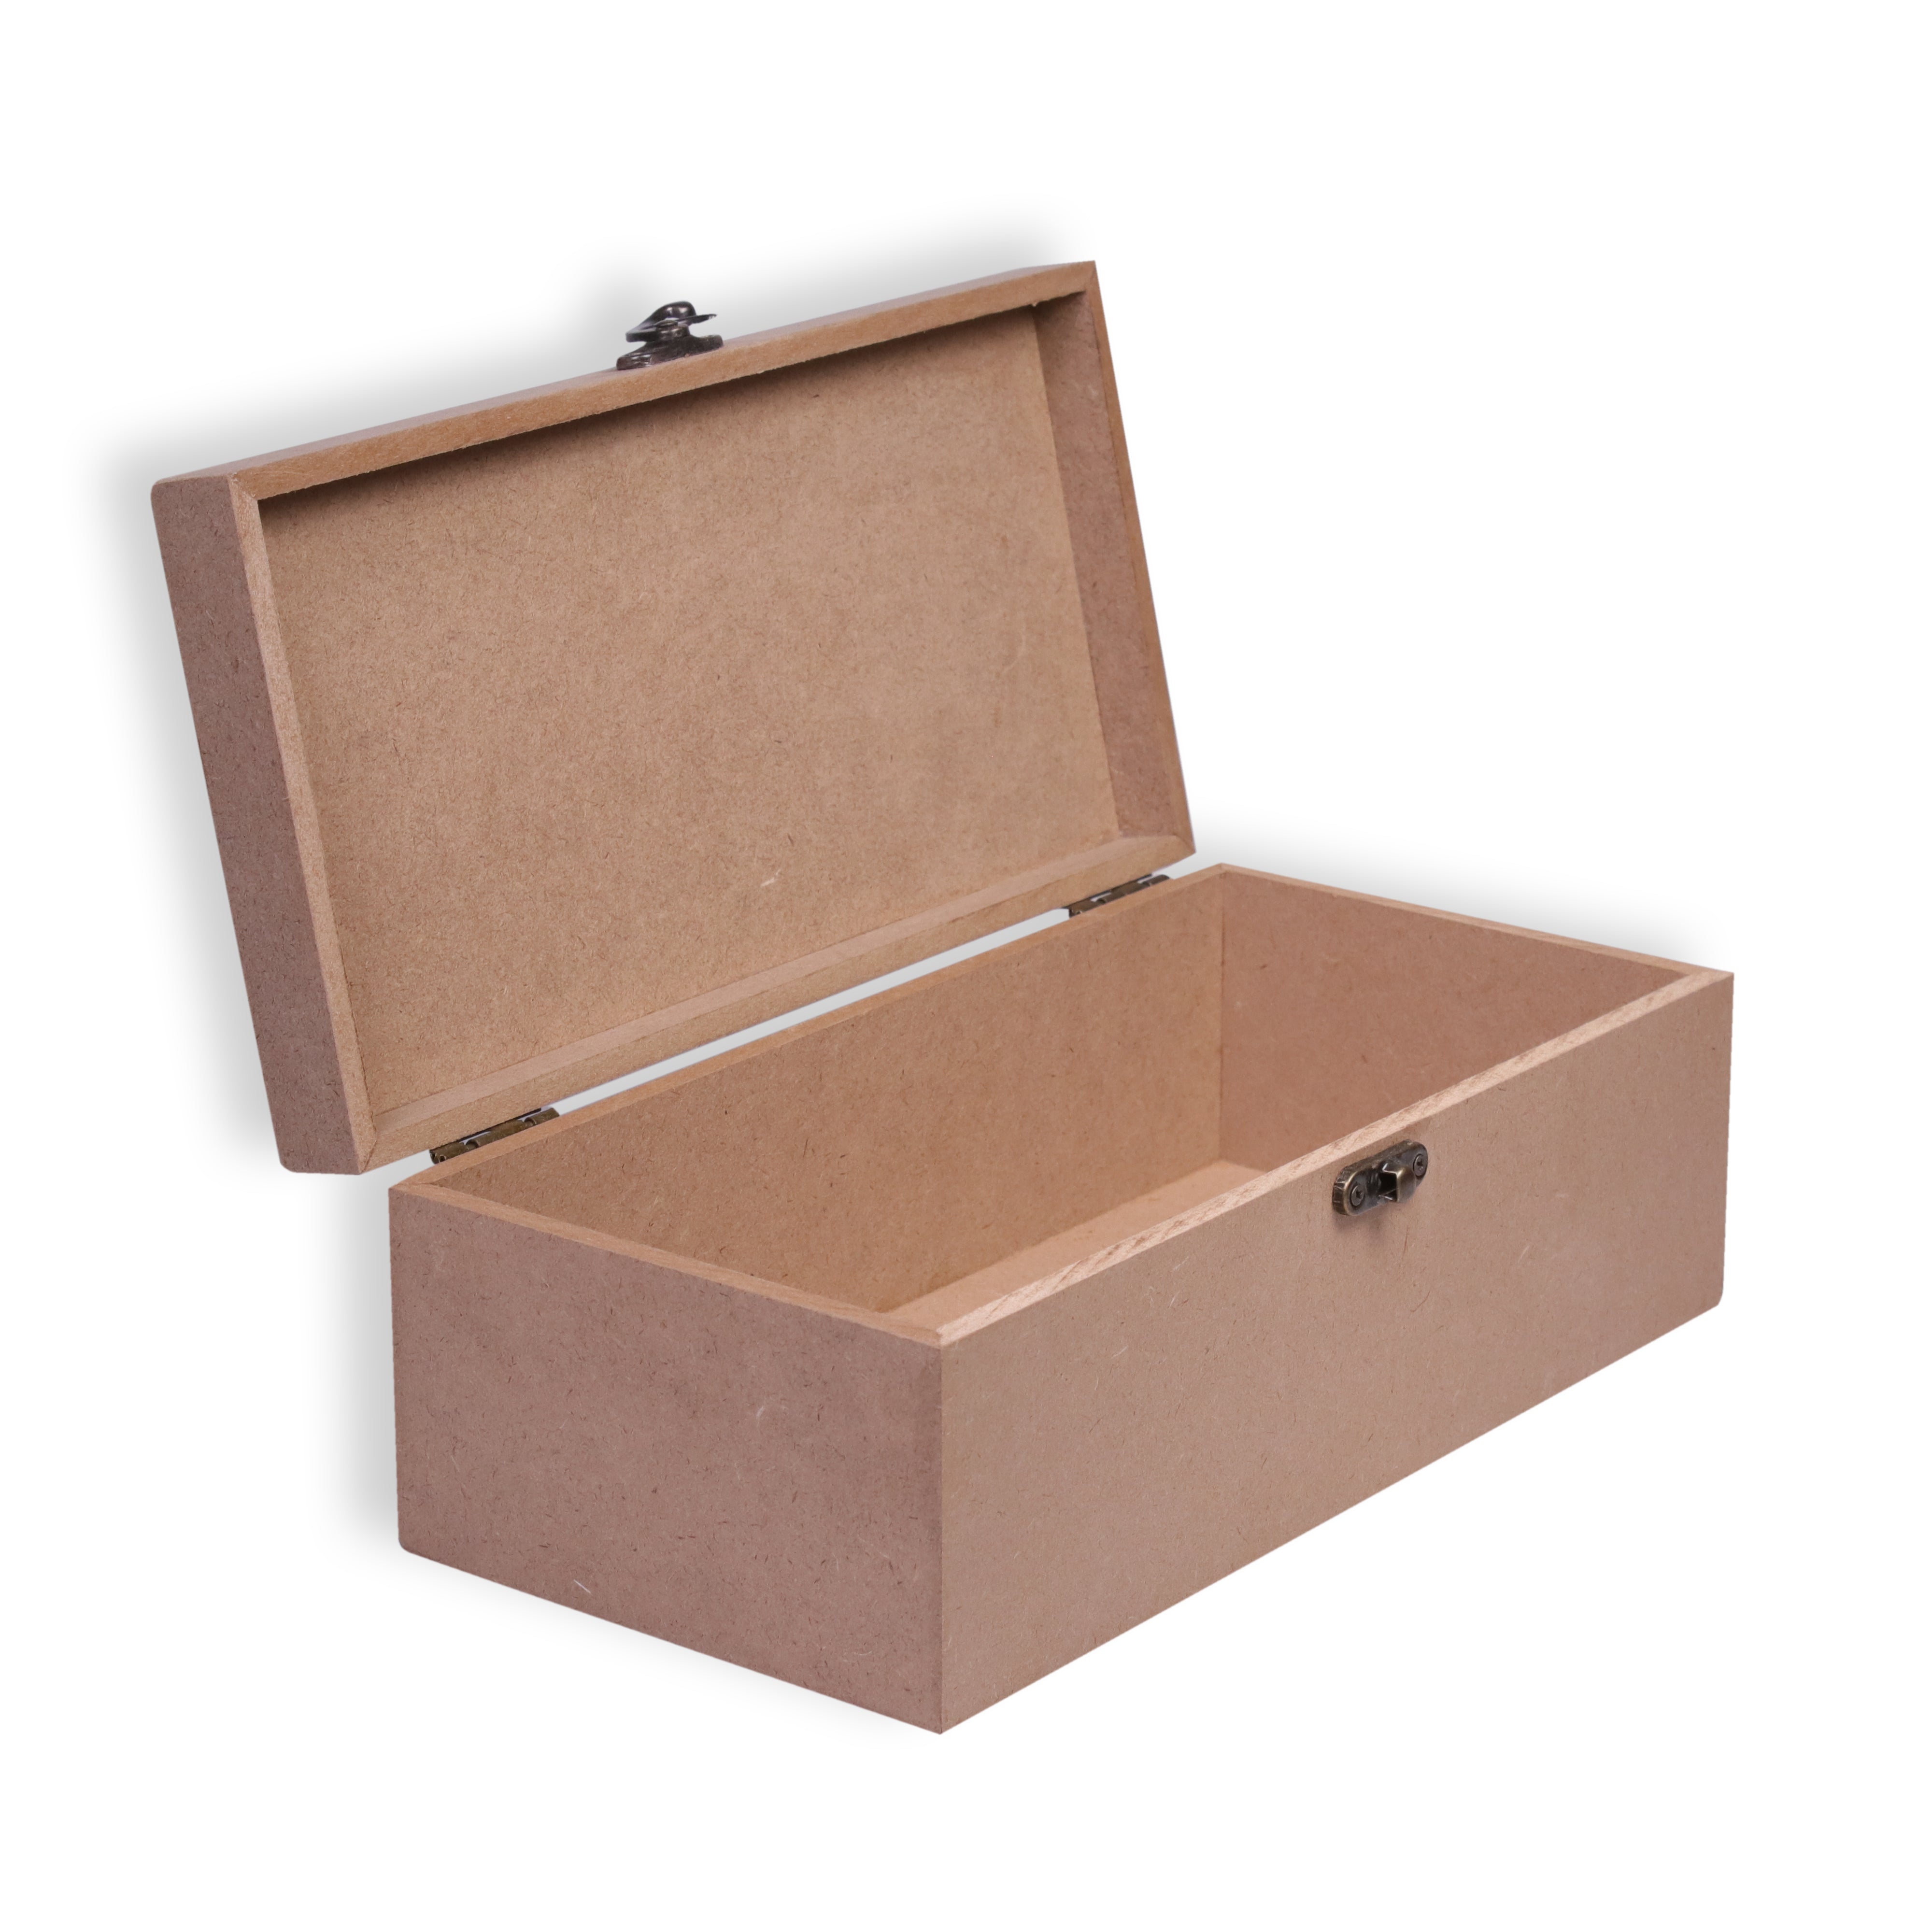 Mdf Box With Latch Rectangle 10 X 5 X 3.5Inch 5.5Mm Thick 1Pc Sw Lb